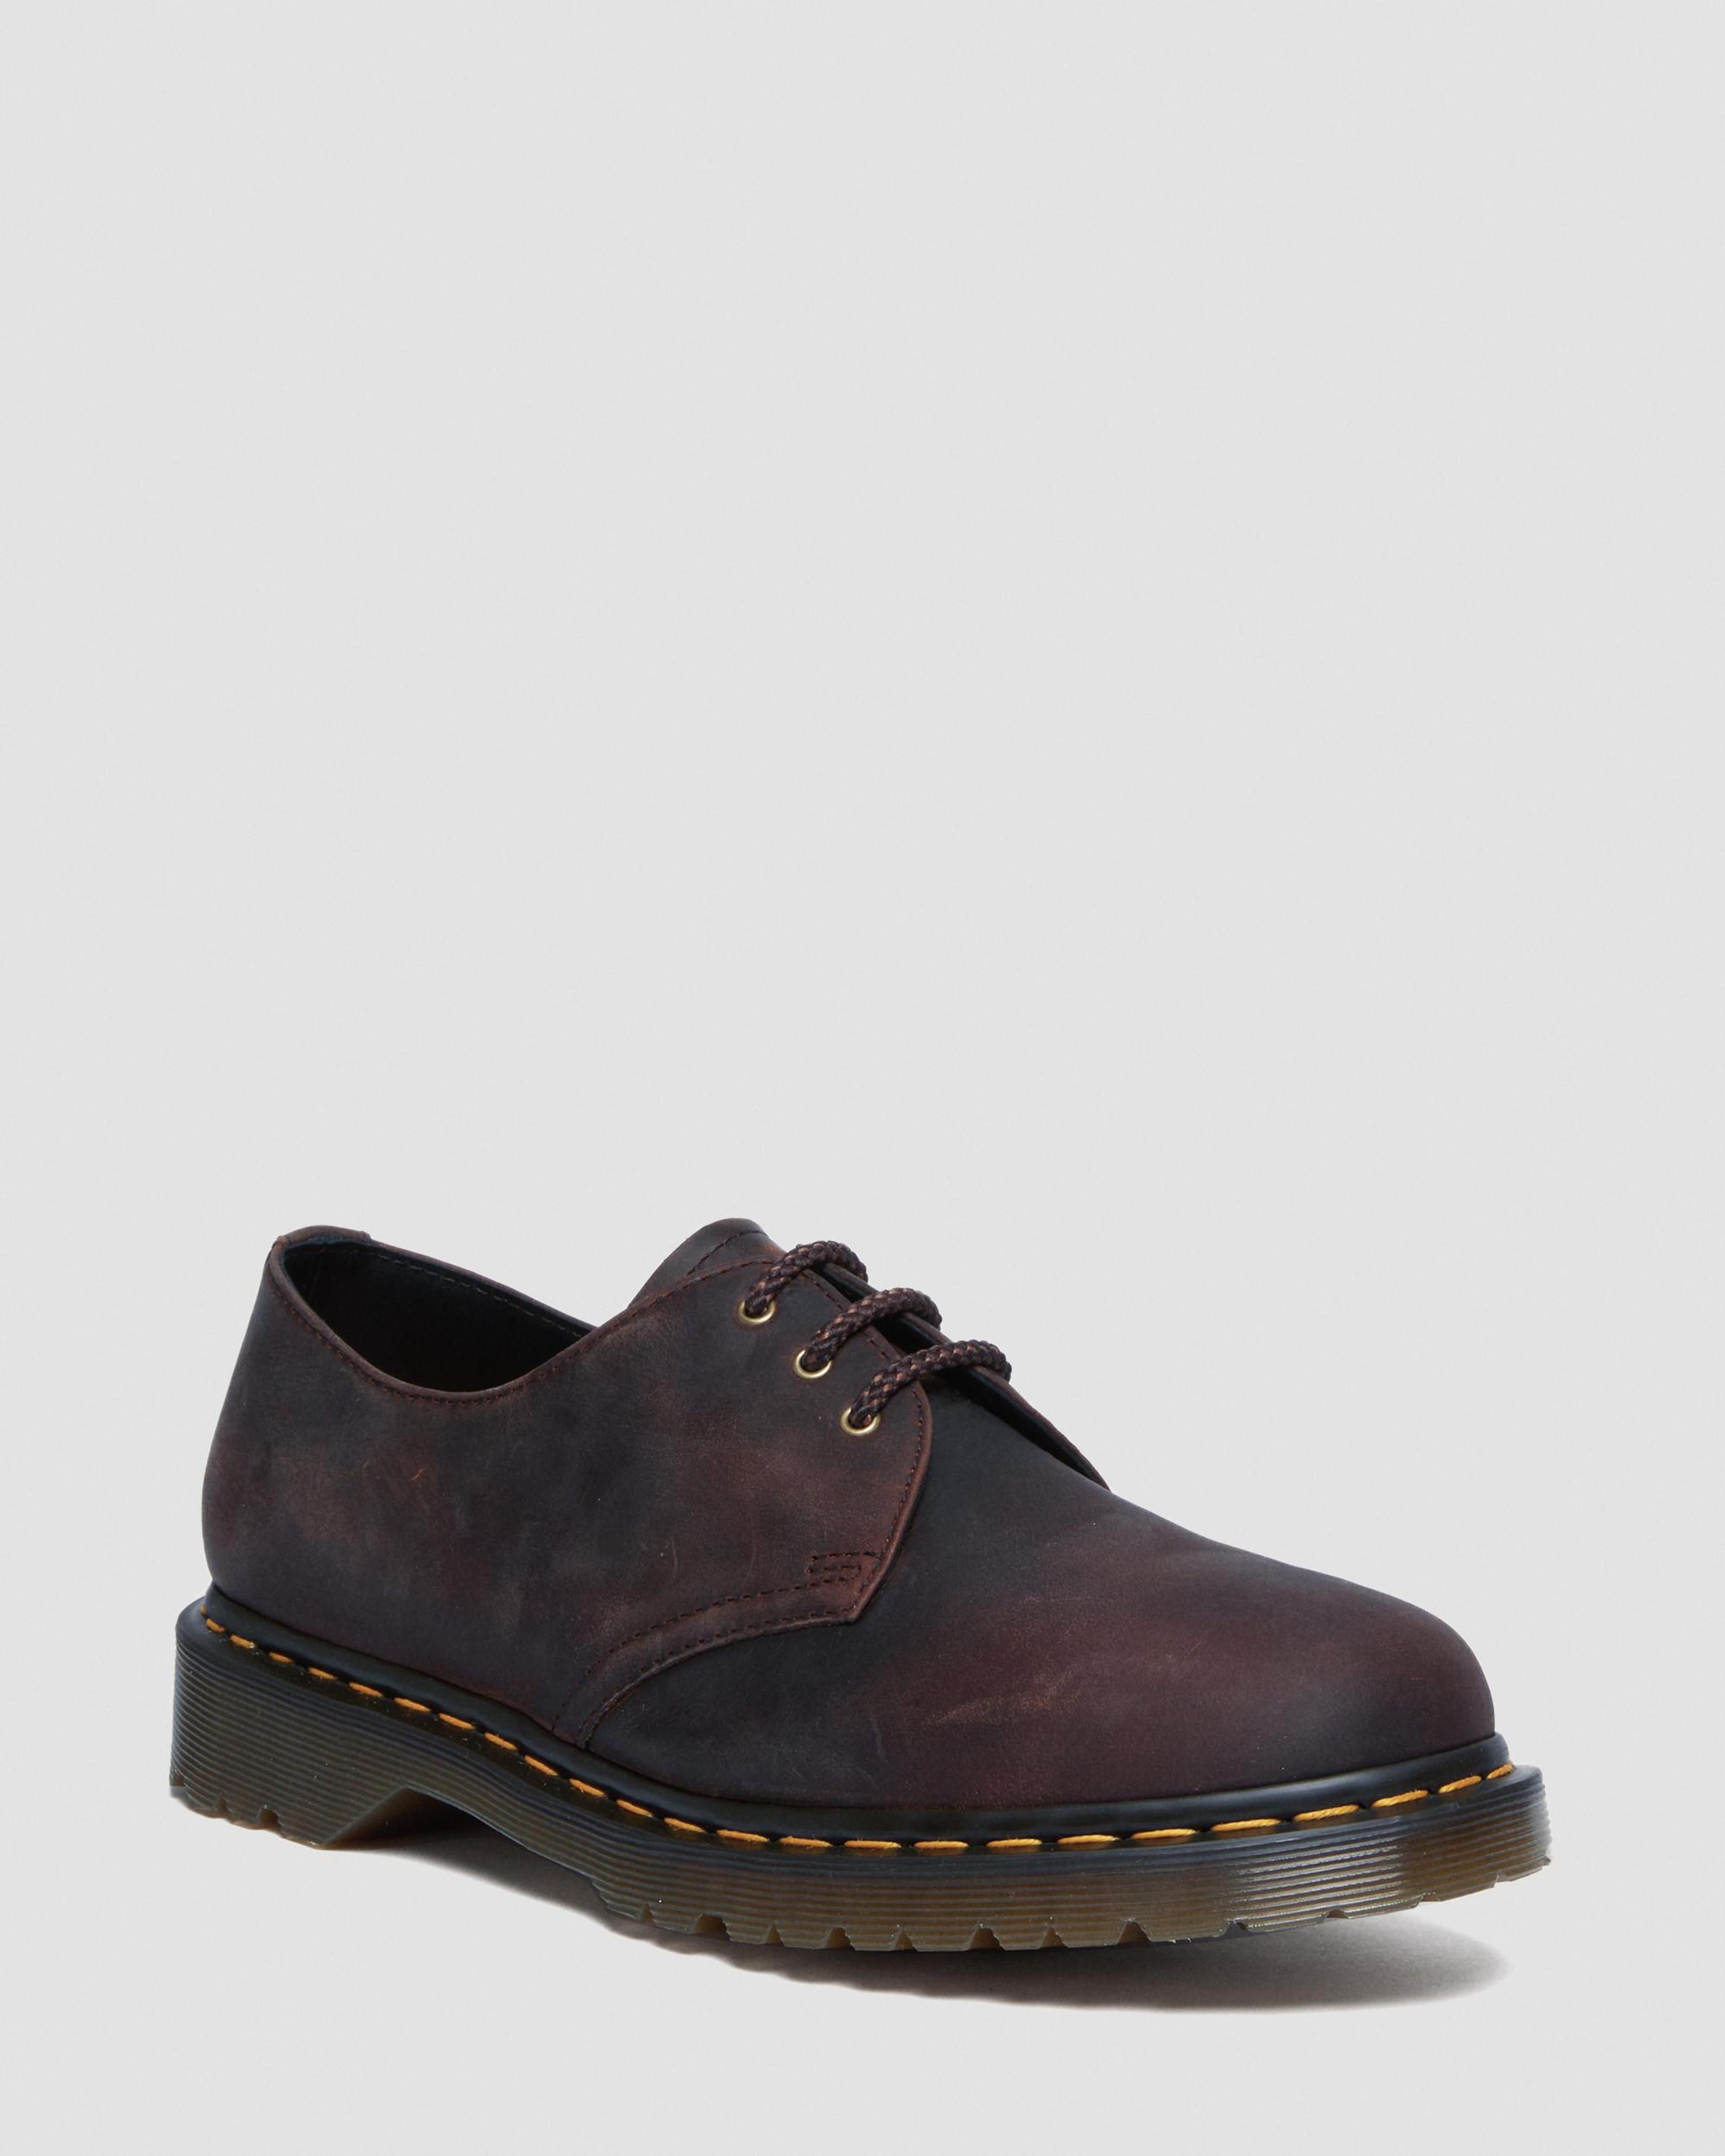 1461 Waxed Full Grain Leather Oxford Shoes | Dr. Martens